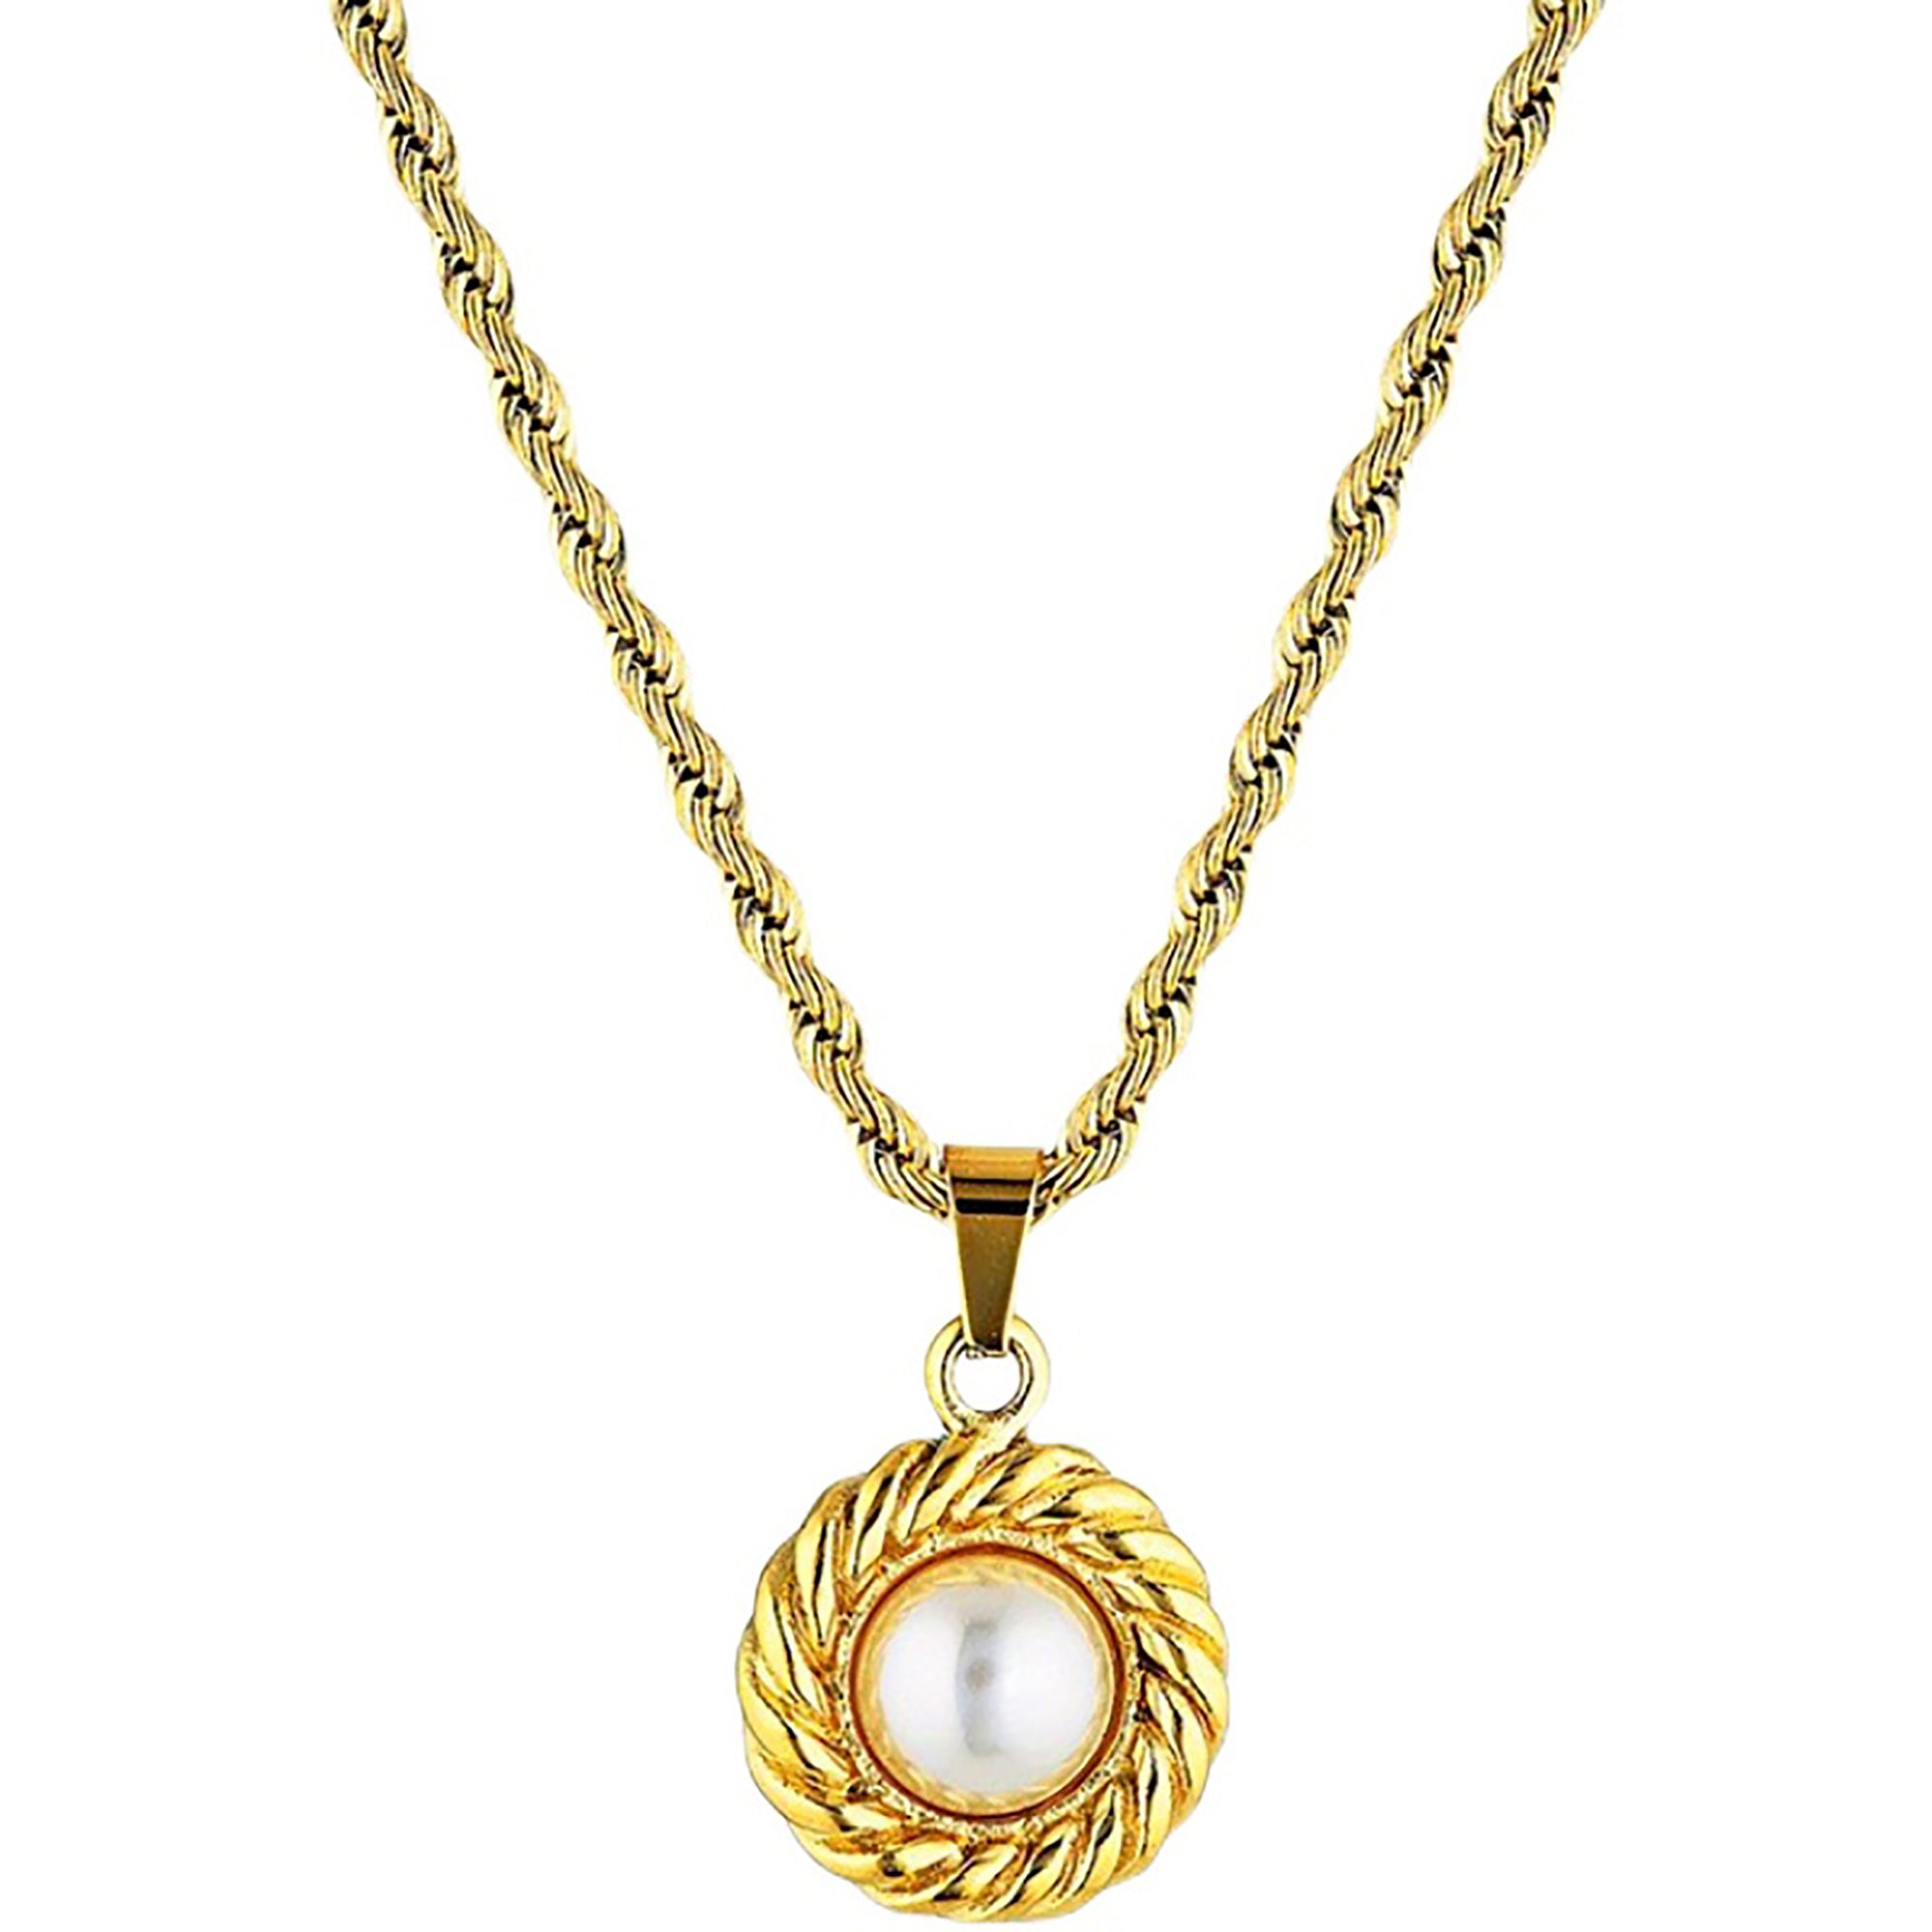 Vintage 18K Gold Plated Square Pearl Pendant Necklace